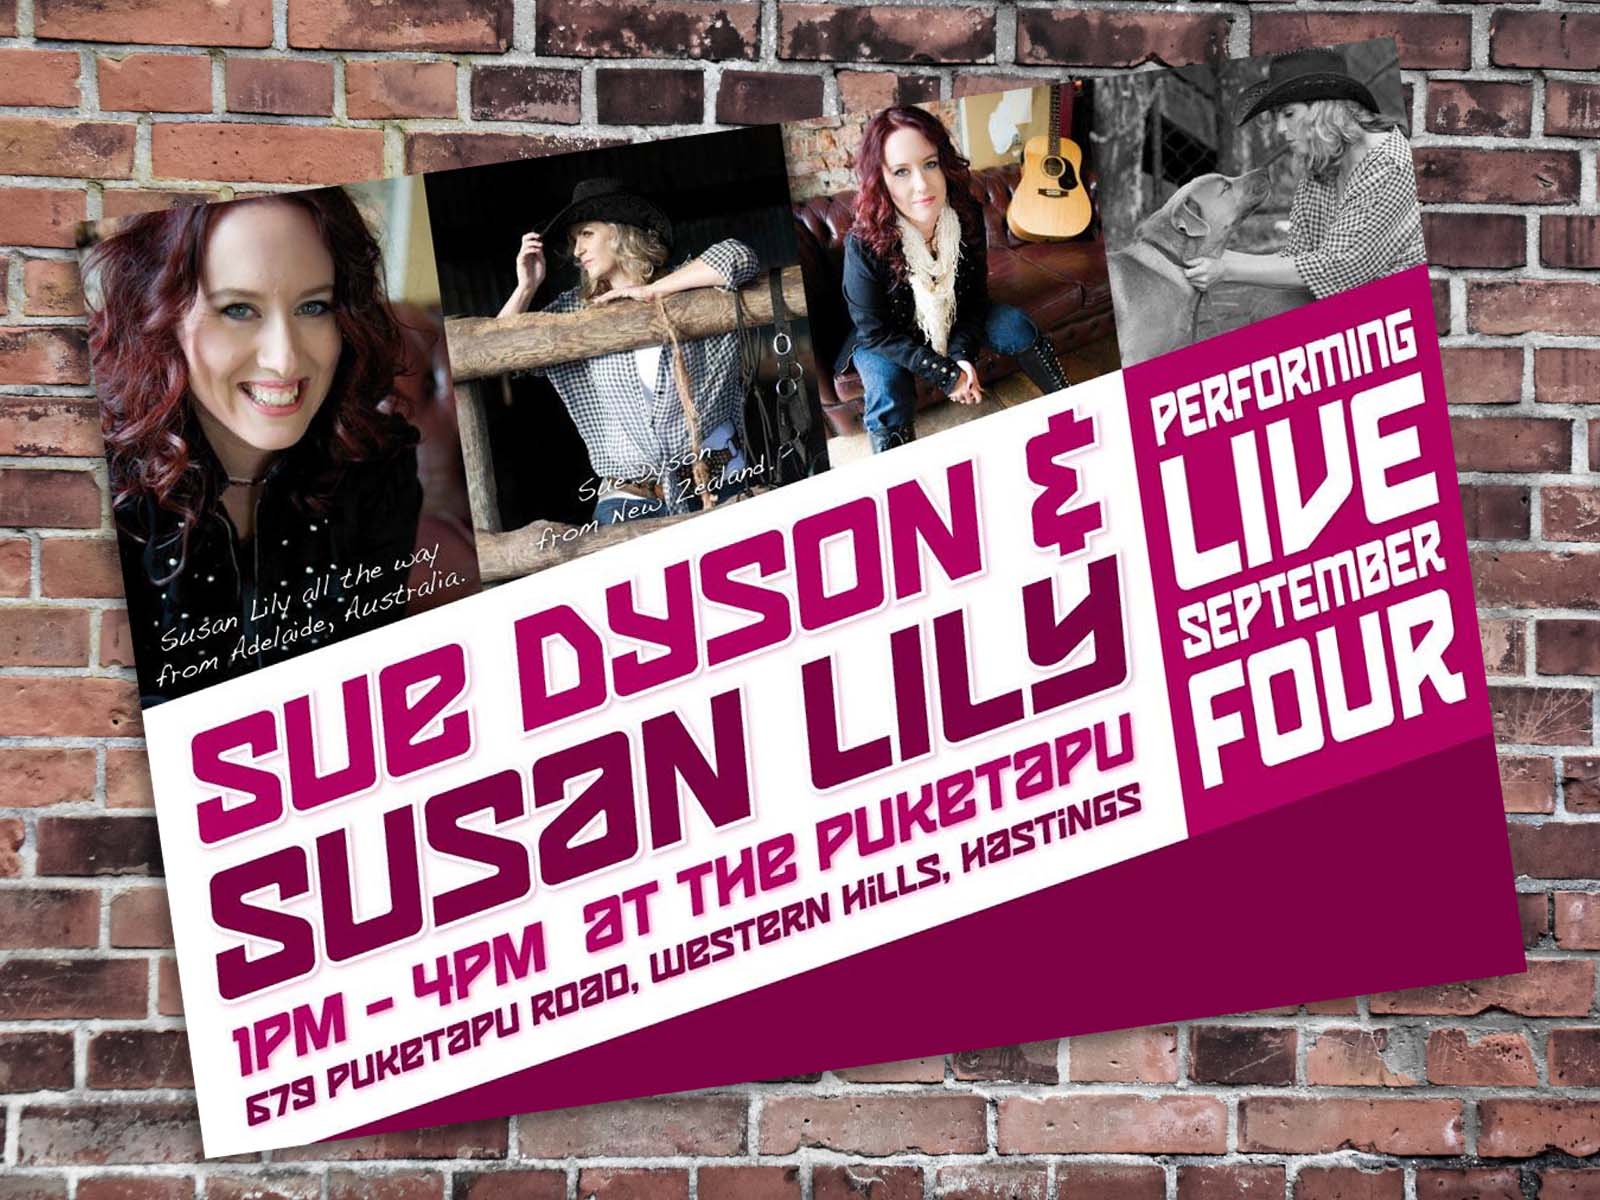 Sue Dyson and Susan Lily poster.